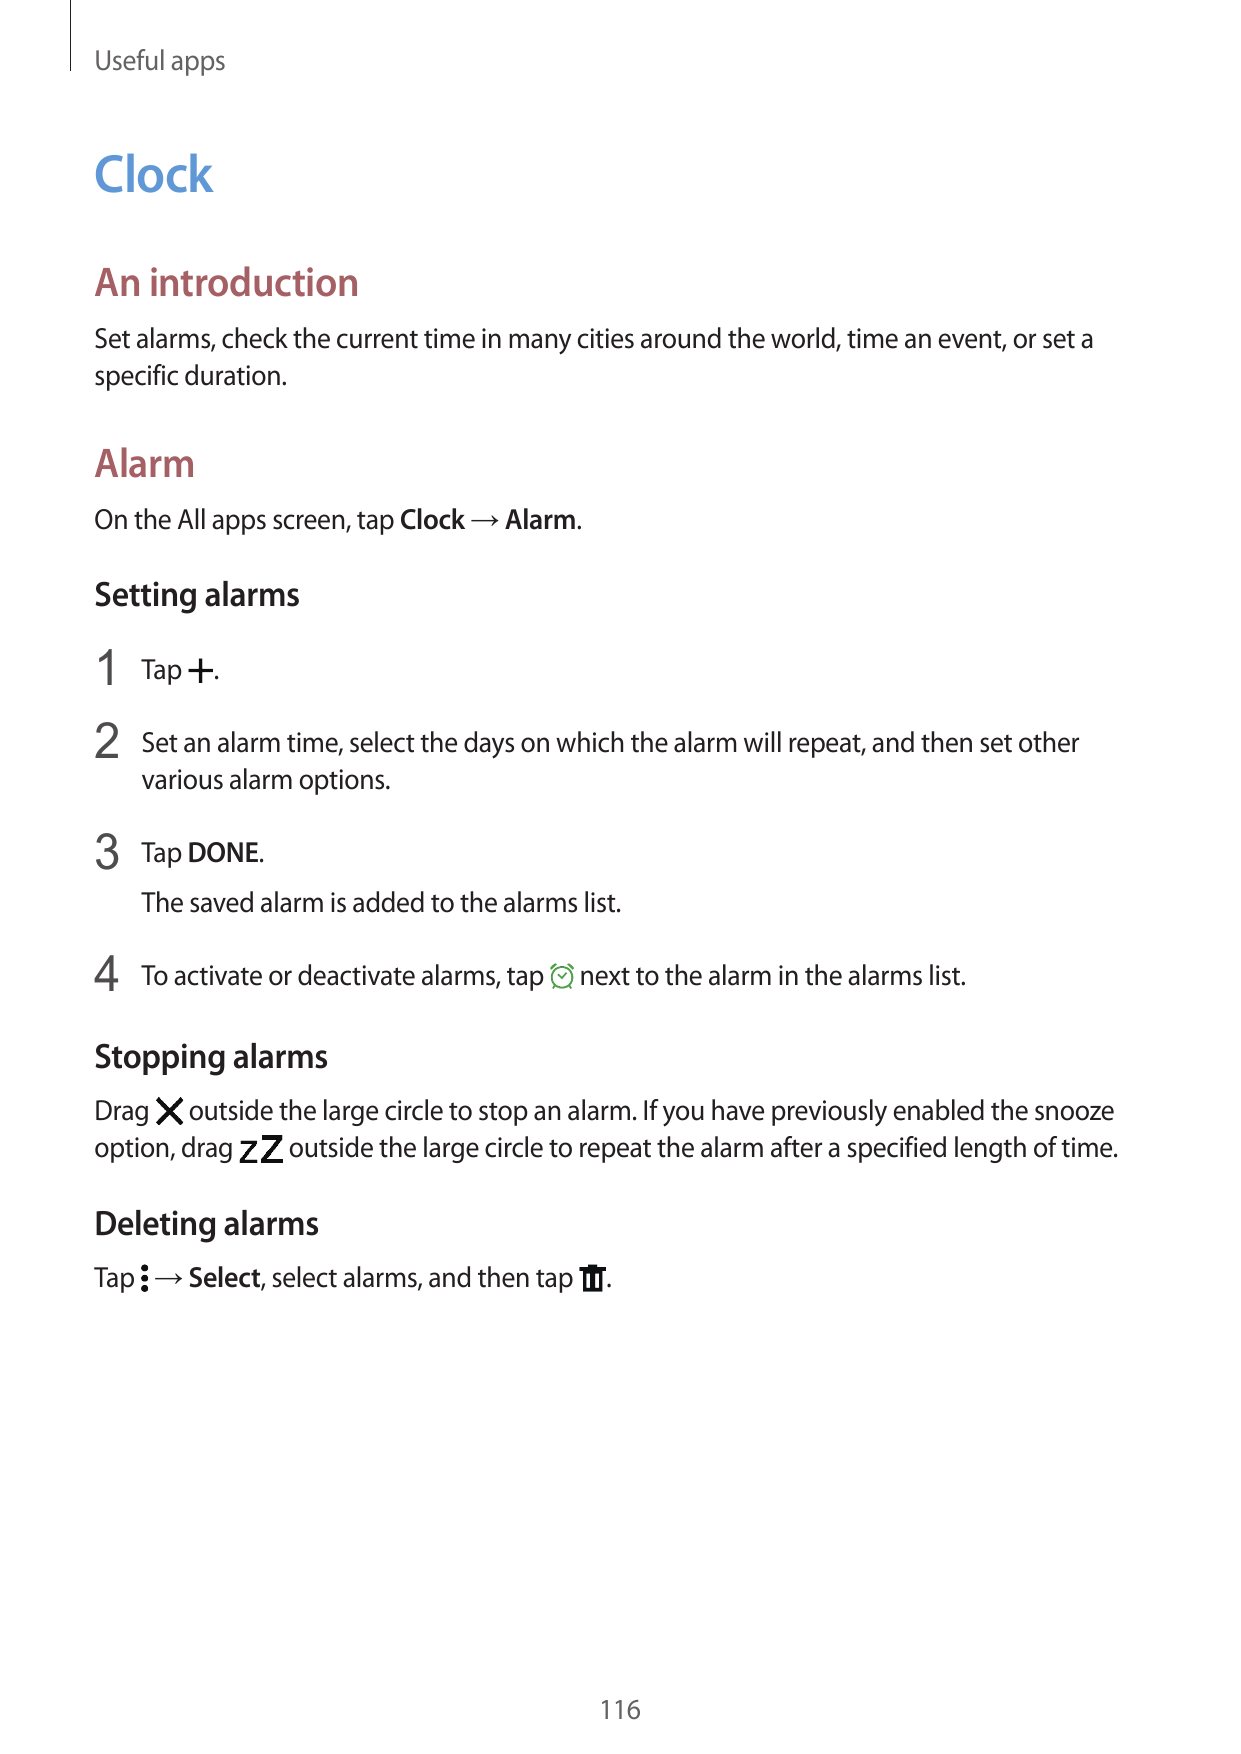 Useful appsClockAn introductionSet alarms, check the current time in many cities around the world, time an event, or set aspecif